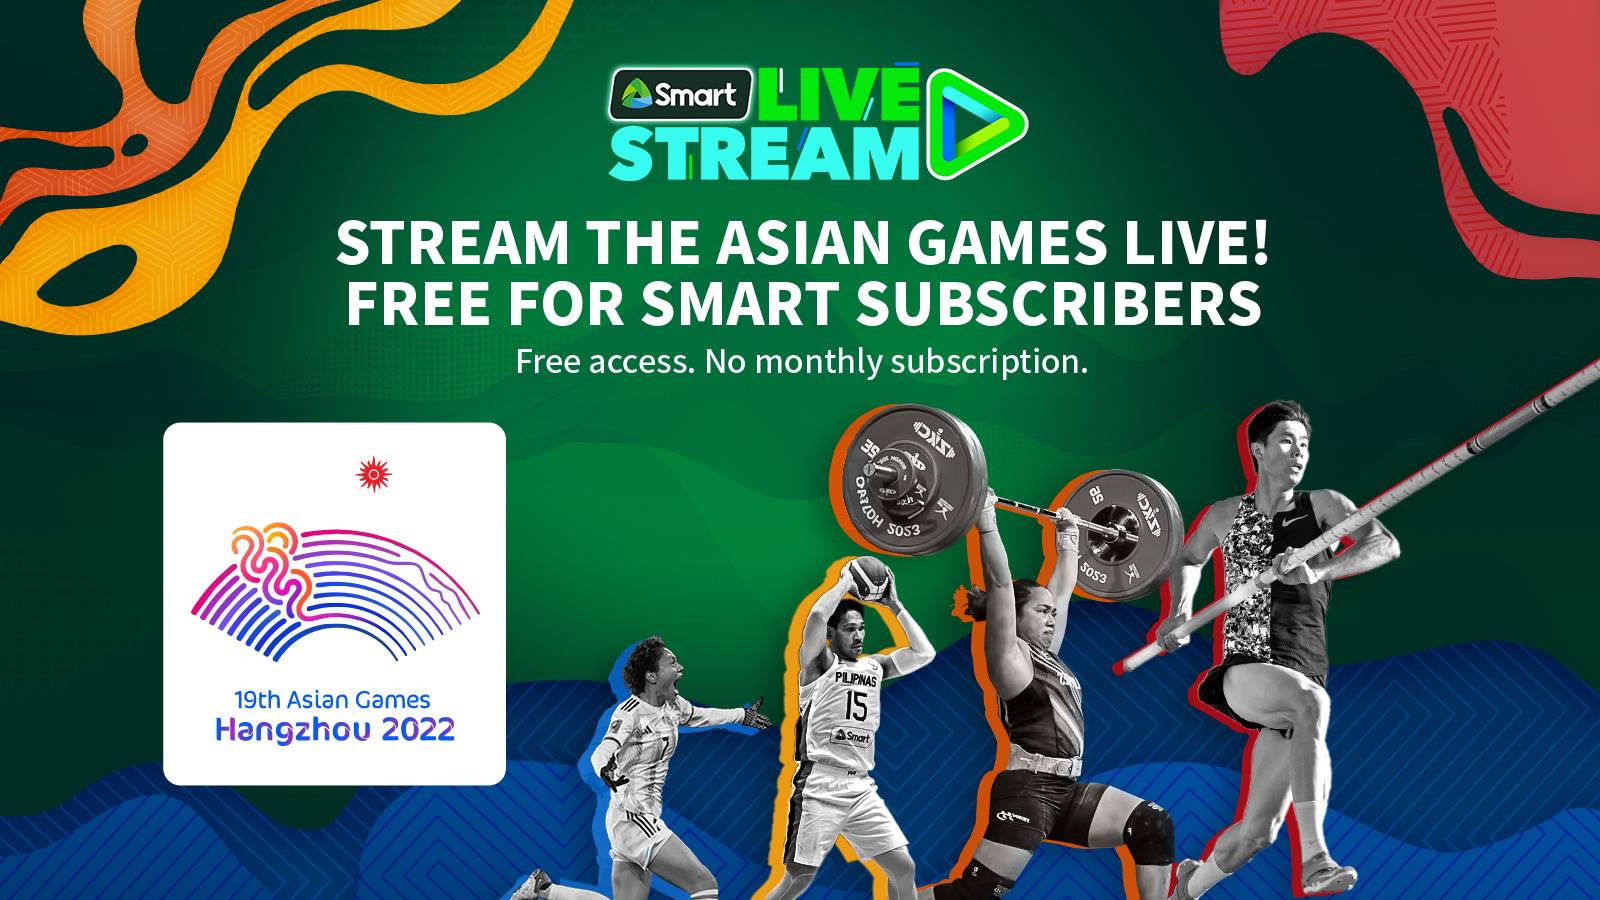 Asian Games to air on Smart Livestream